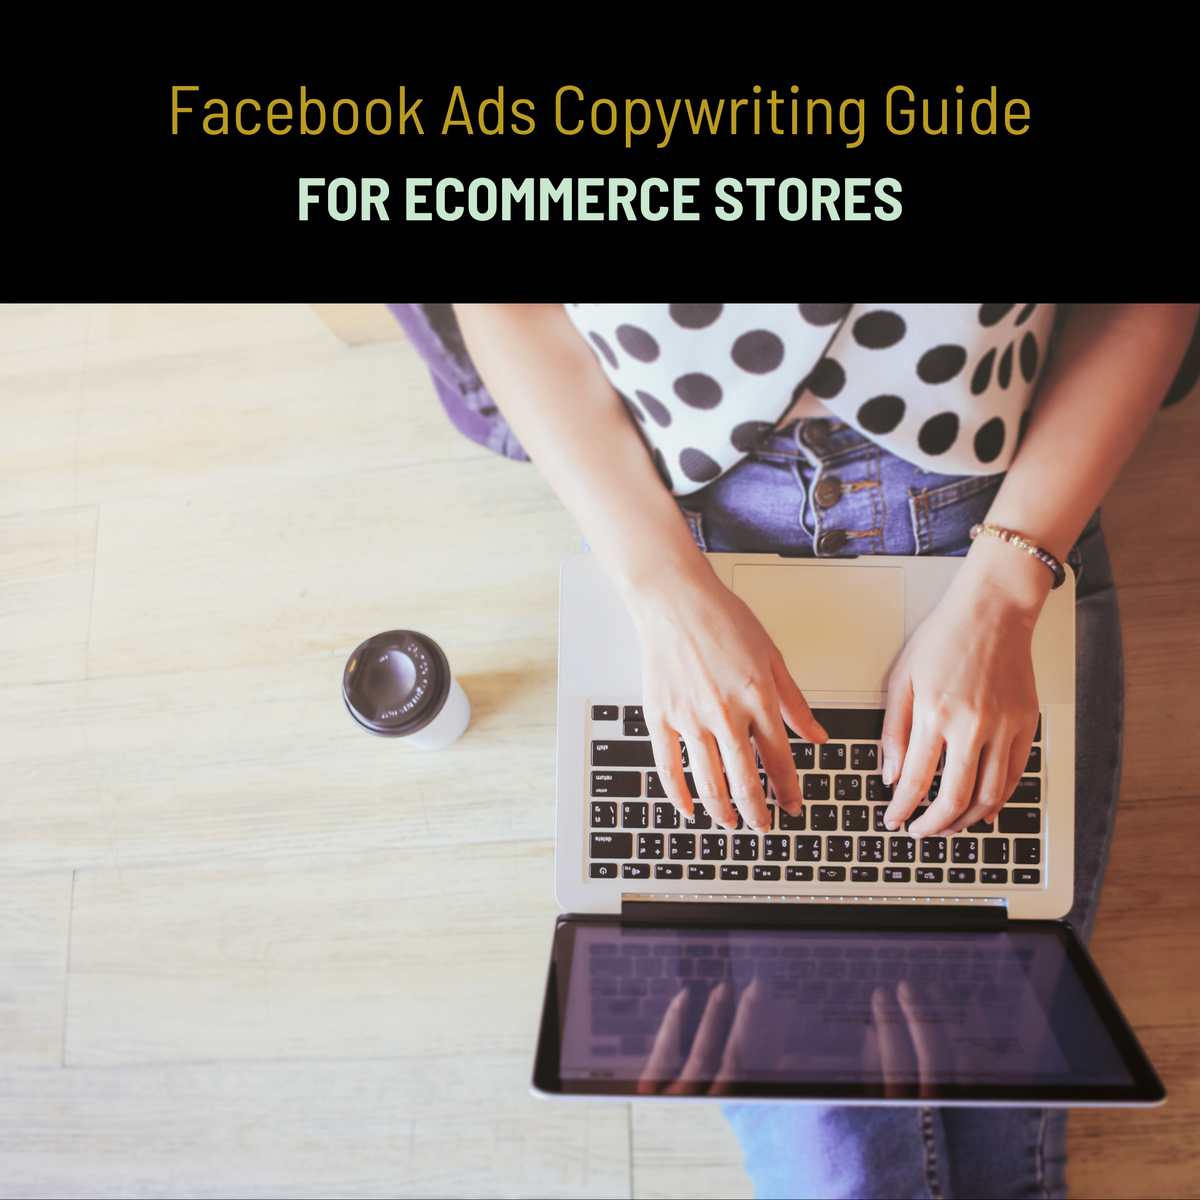 Copywriting Guide For Ecommerce Facebook Ads